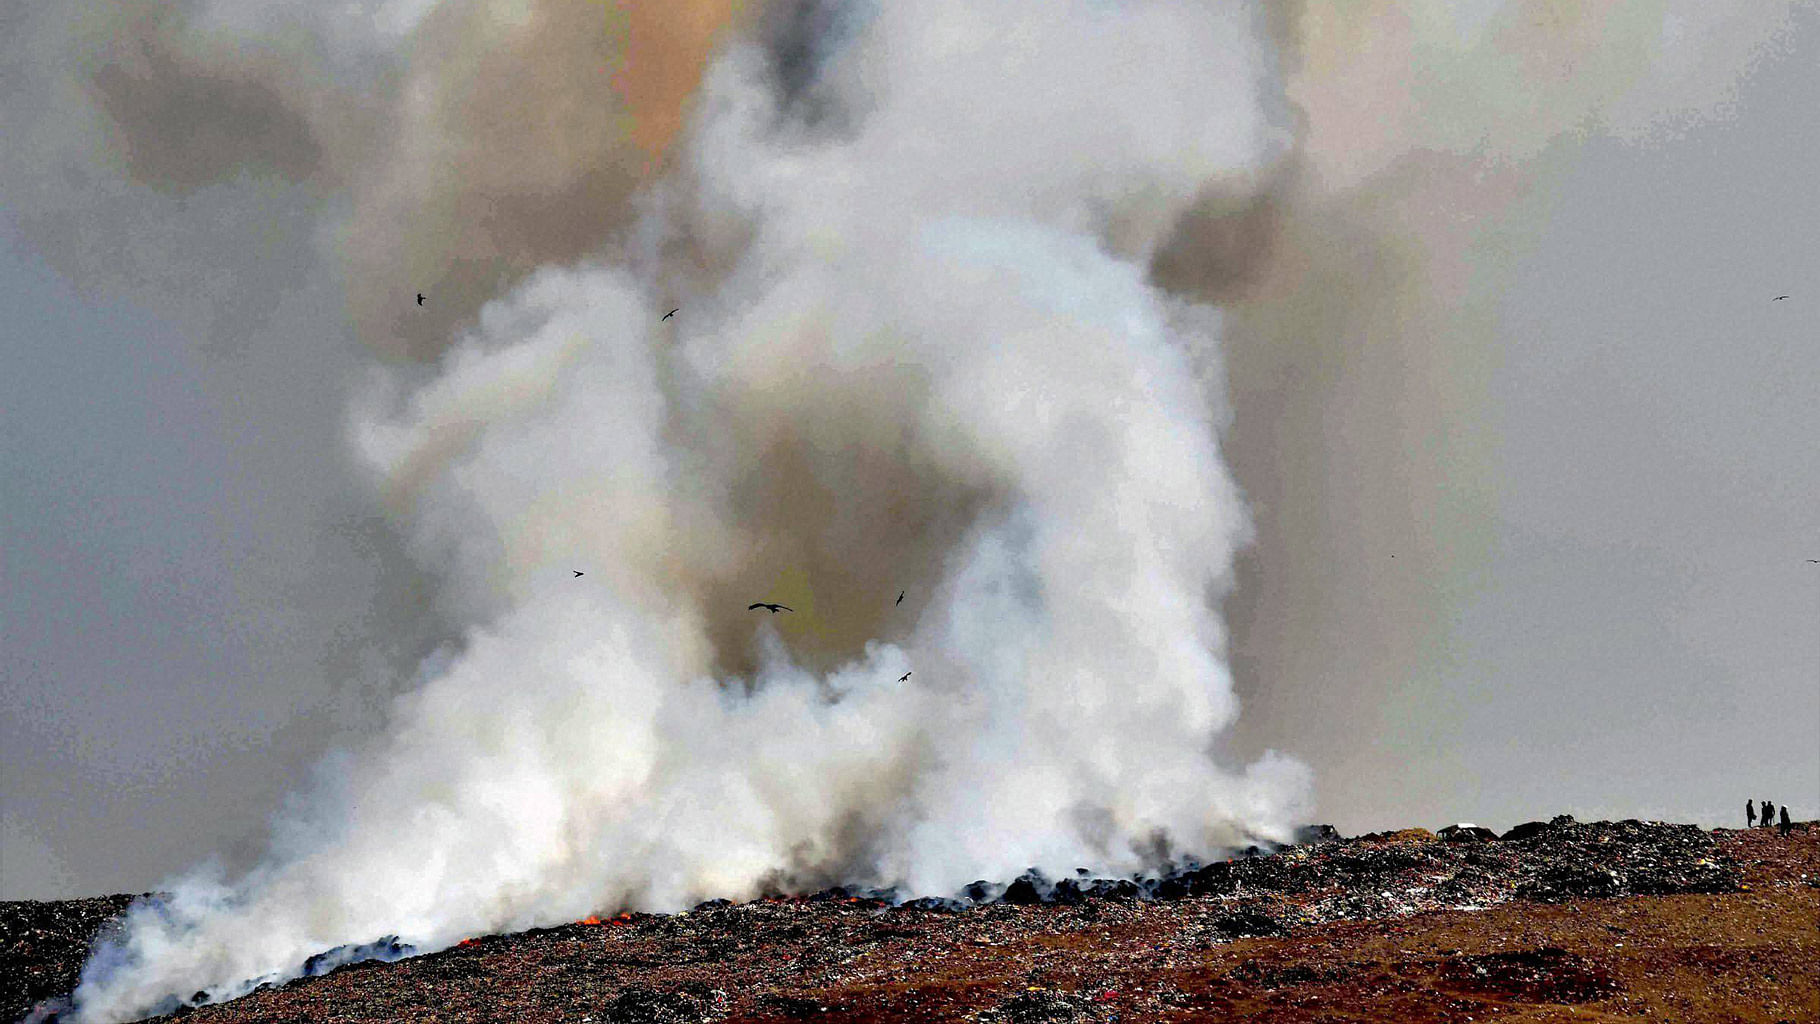 This is the second major fire at the landfill this year. (Photo: PTI)